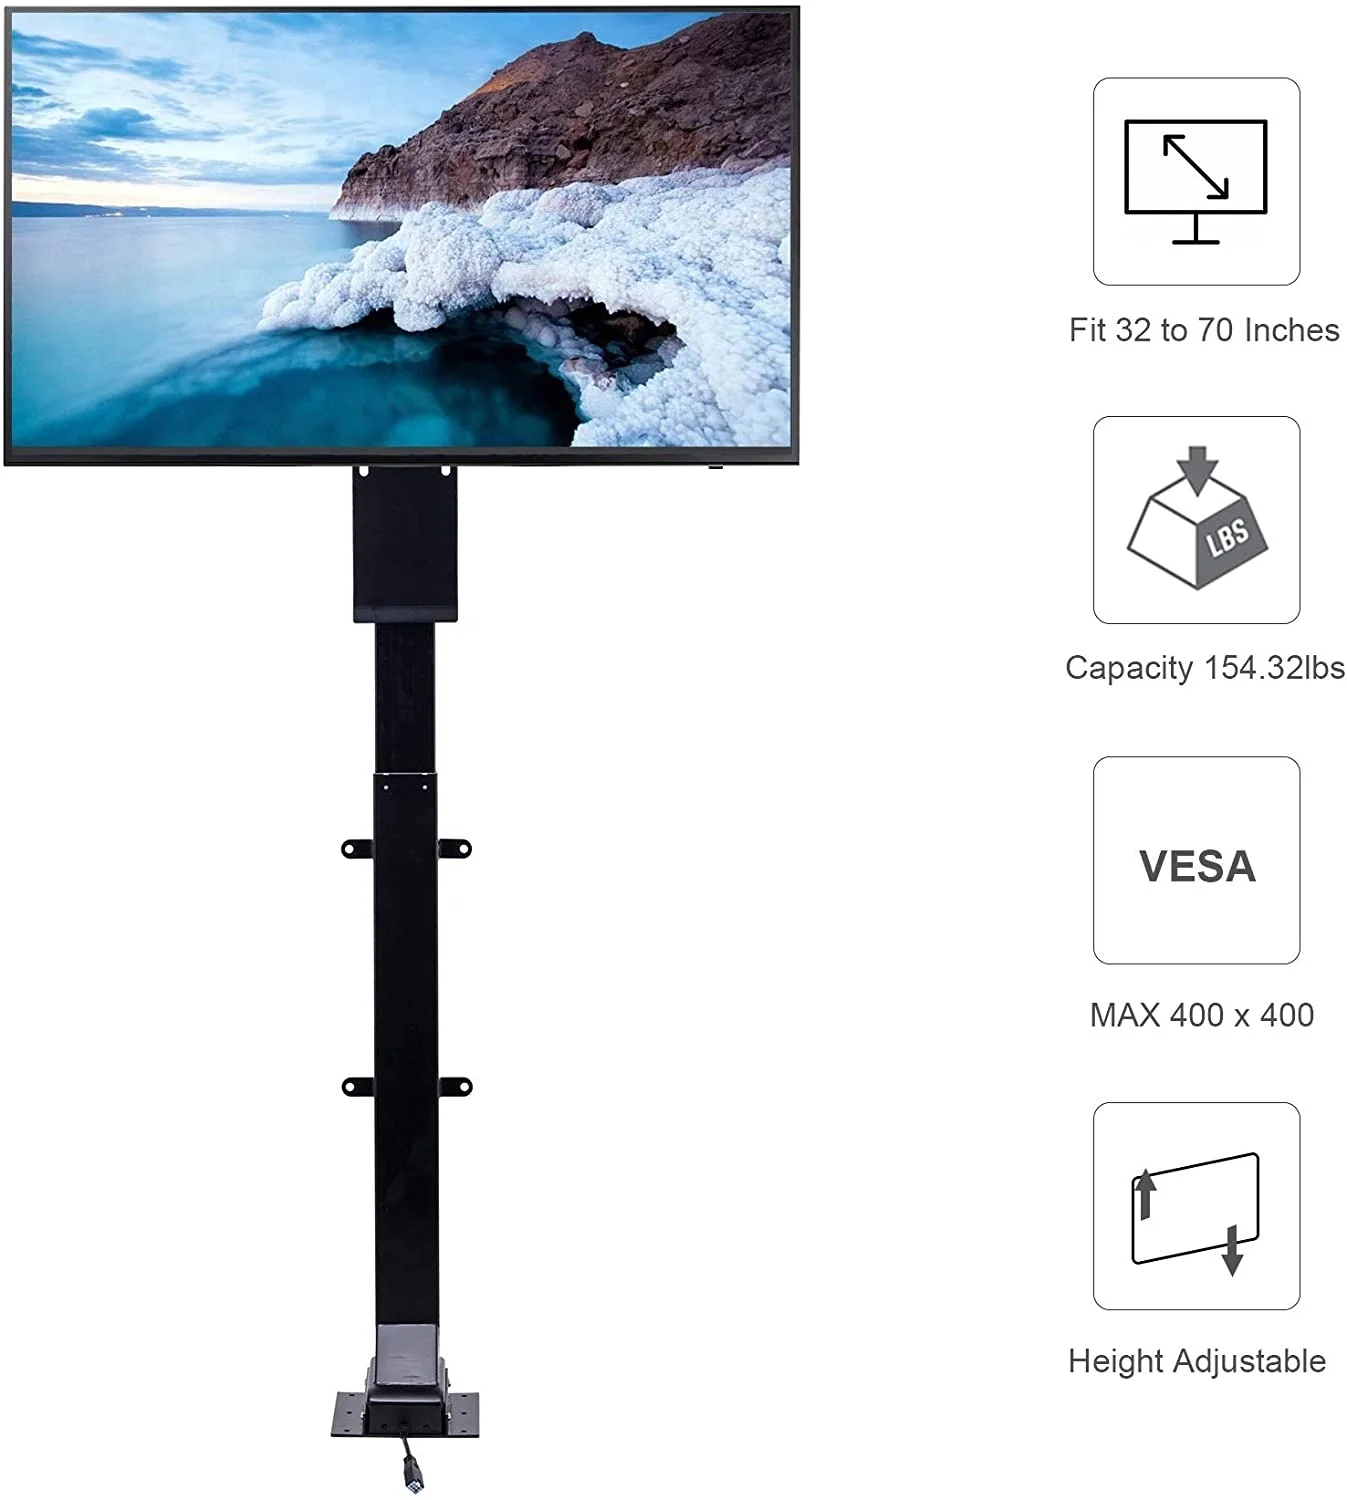 Motorized TV Lift 32"-70" TV Lift Mount Auto Lifting Adjustable Height with Remote Controller for Plasma LCD LED TV and Monitors